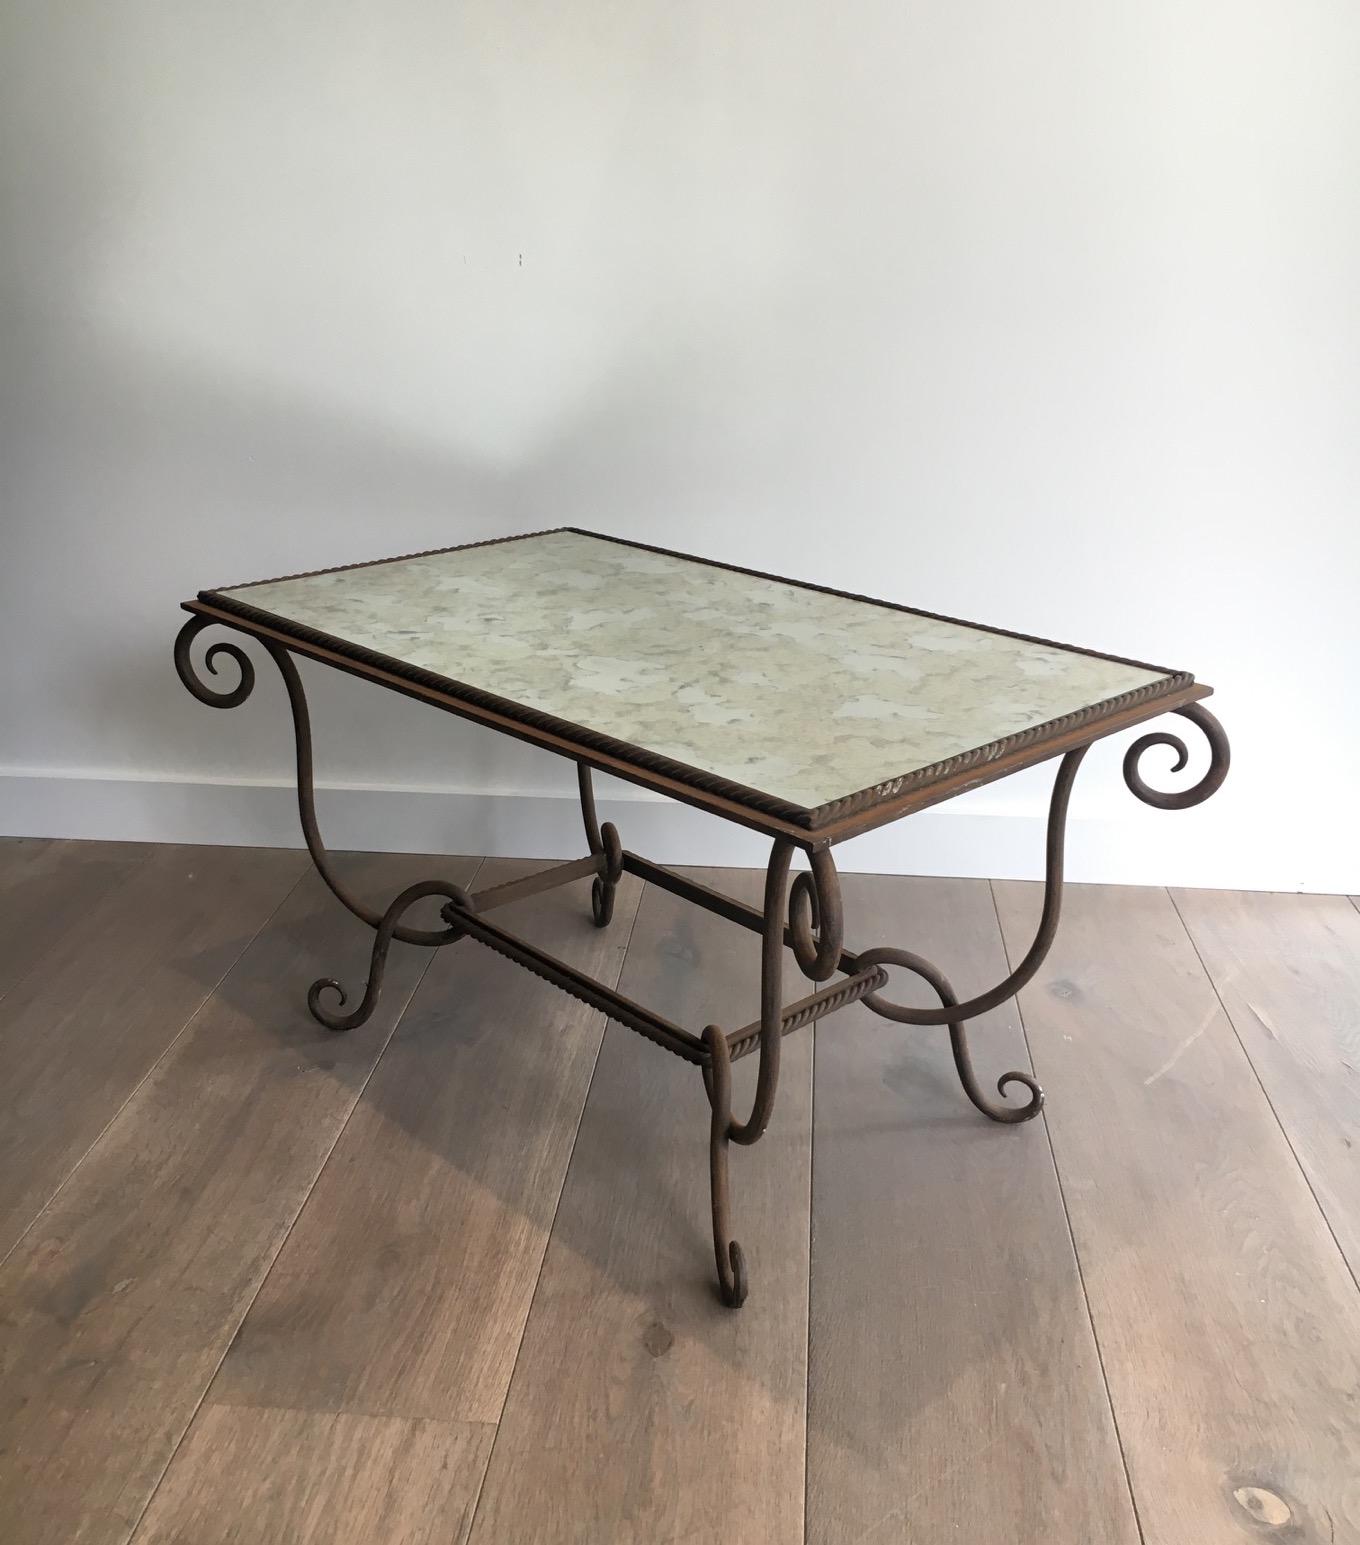 René Prou, Wrought and Hammered Iron Coffee Table with Faux-Antique Mirror Top 1